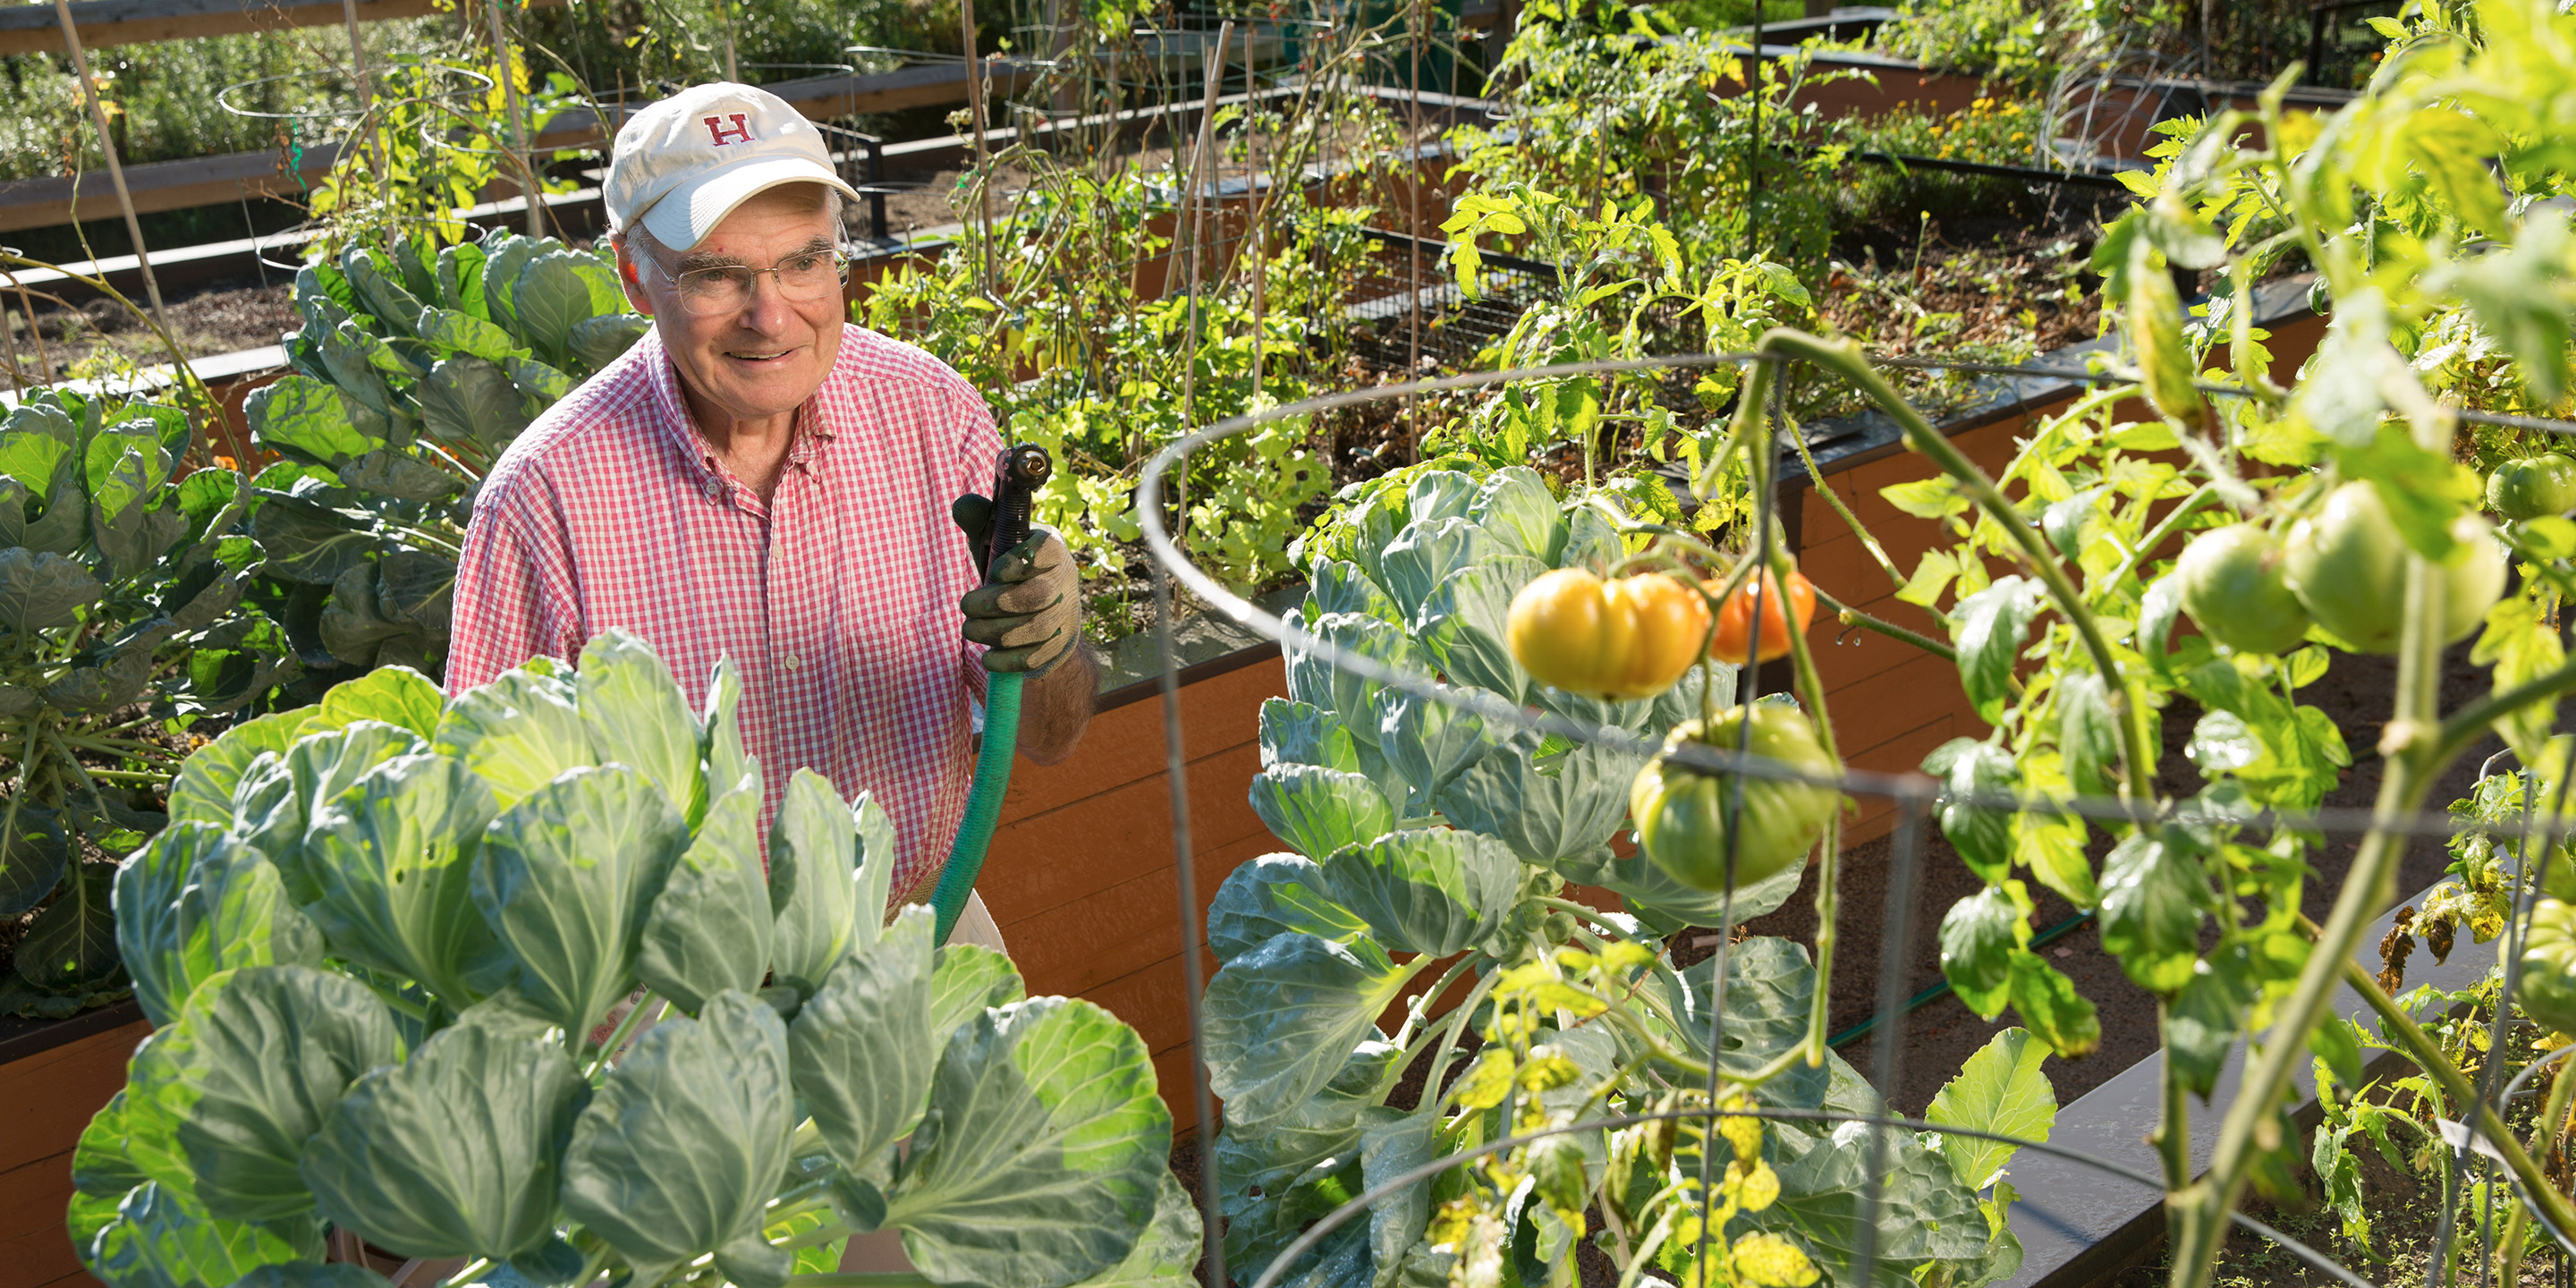 A male resident uses a hose to water his standing beds of vegetables.